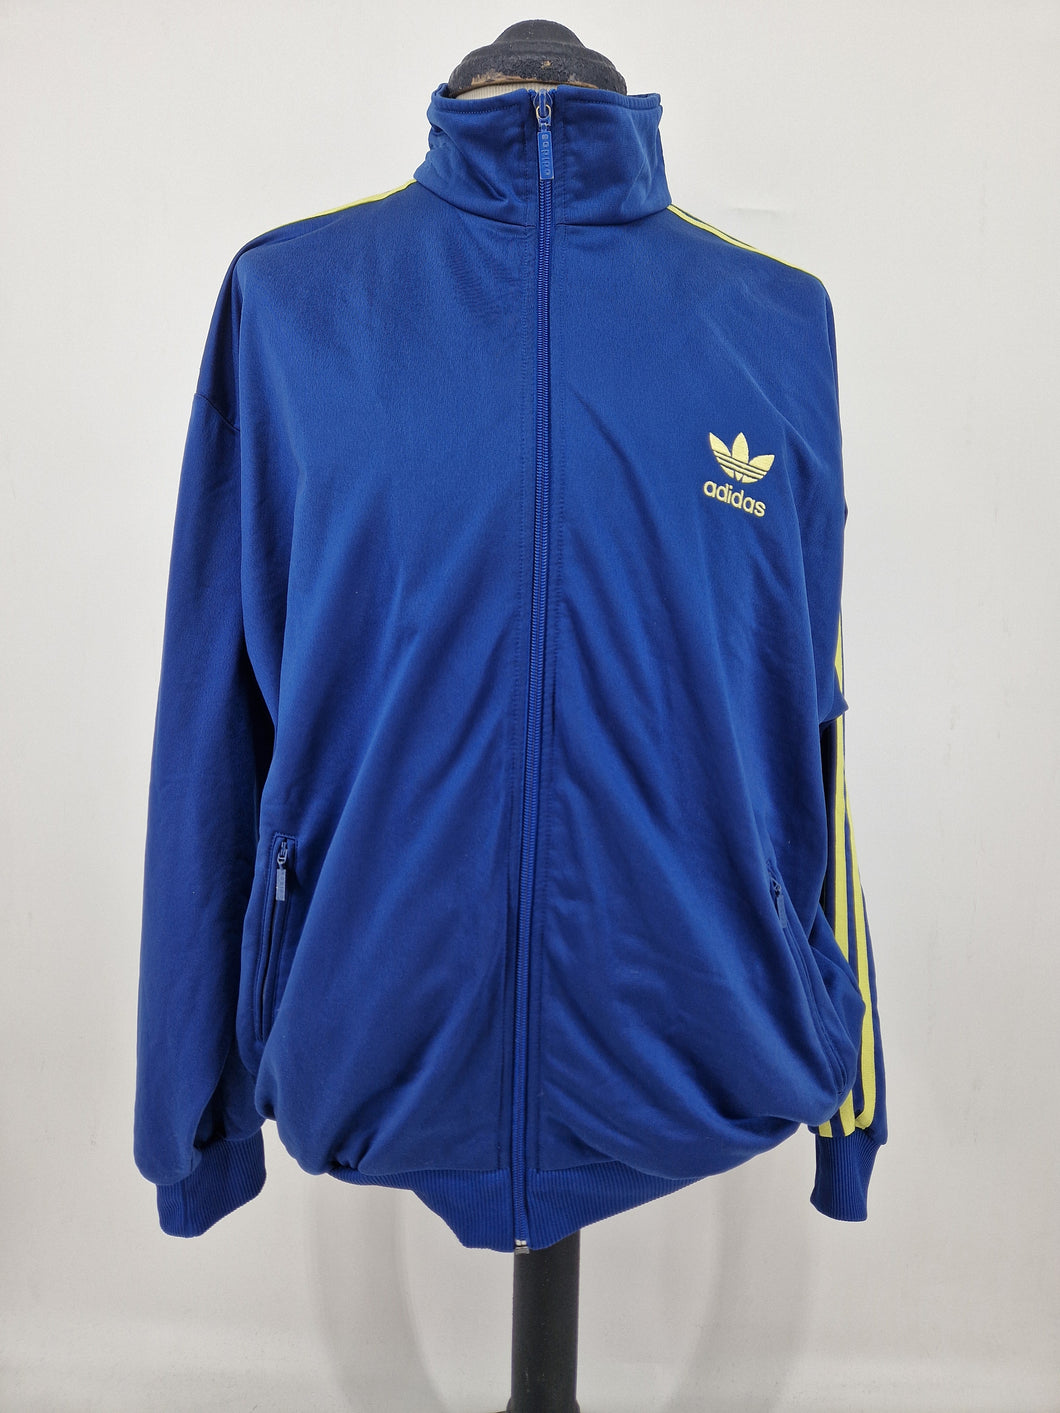 90s adidas Originals Firebird Vintage Track Top L D8 Blue Yellow made in Taiwan